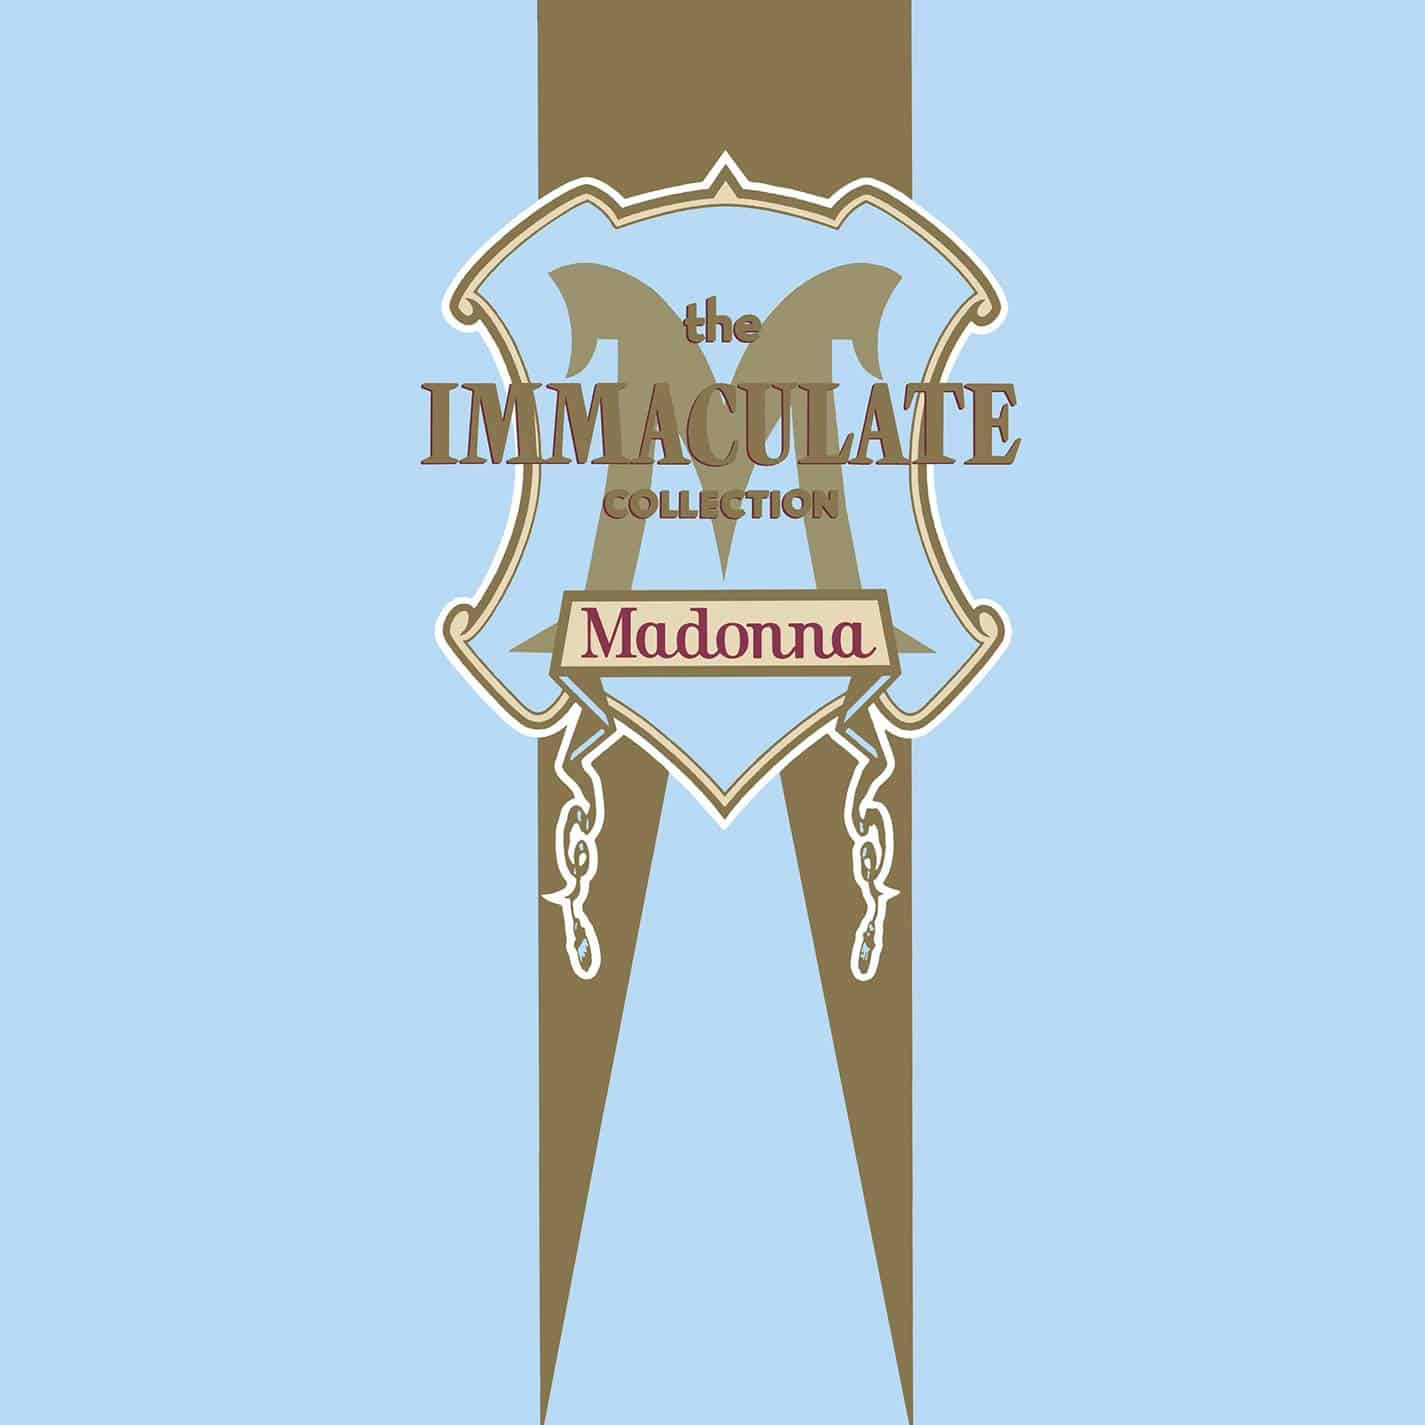 Madonna-the-immaculate-collection-vinyl-record-album-LP-front